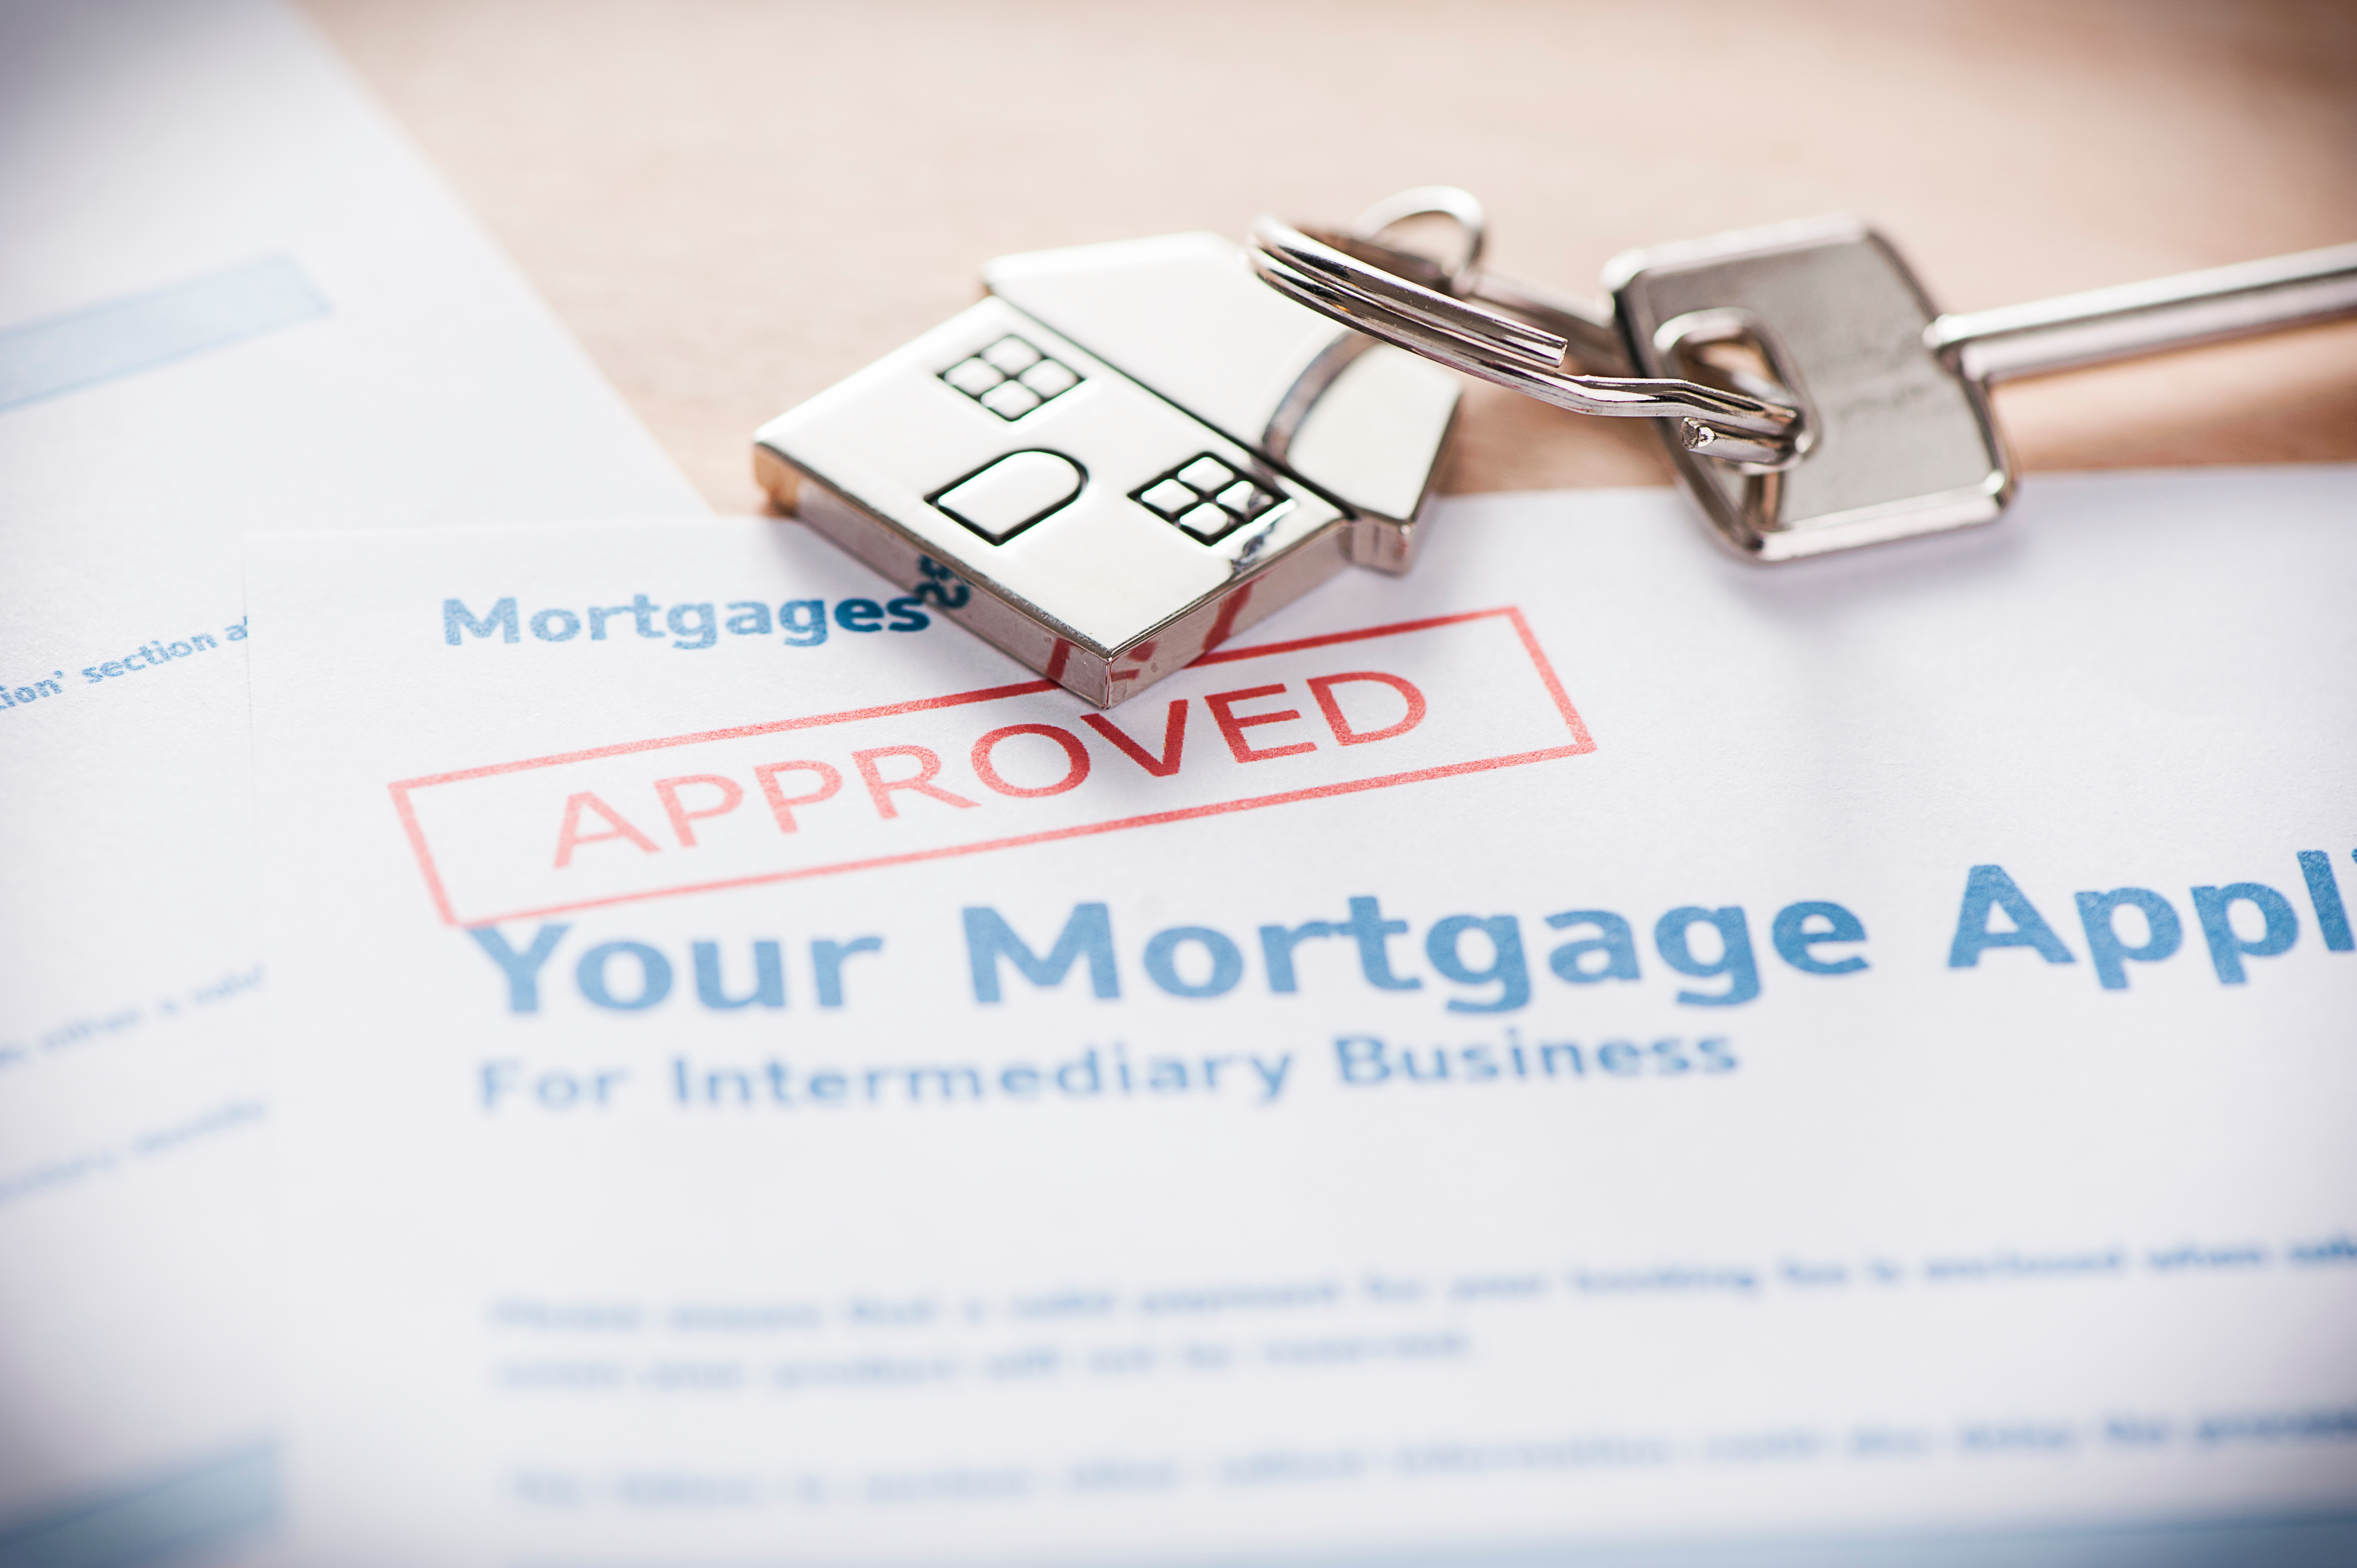 Learn everything about mortgage loans! Source: Adobe Stock.